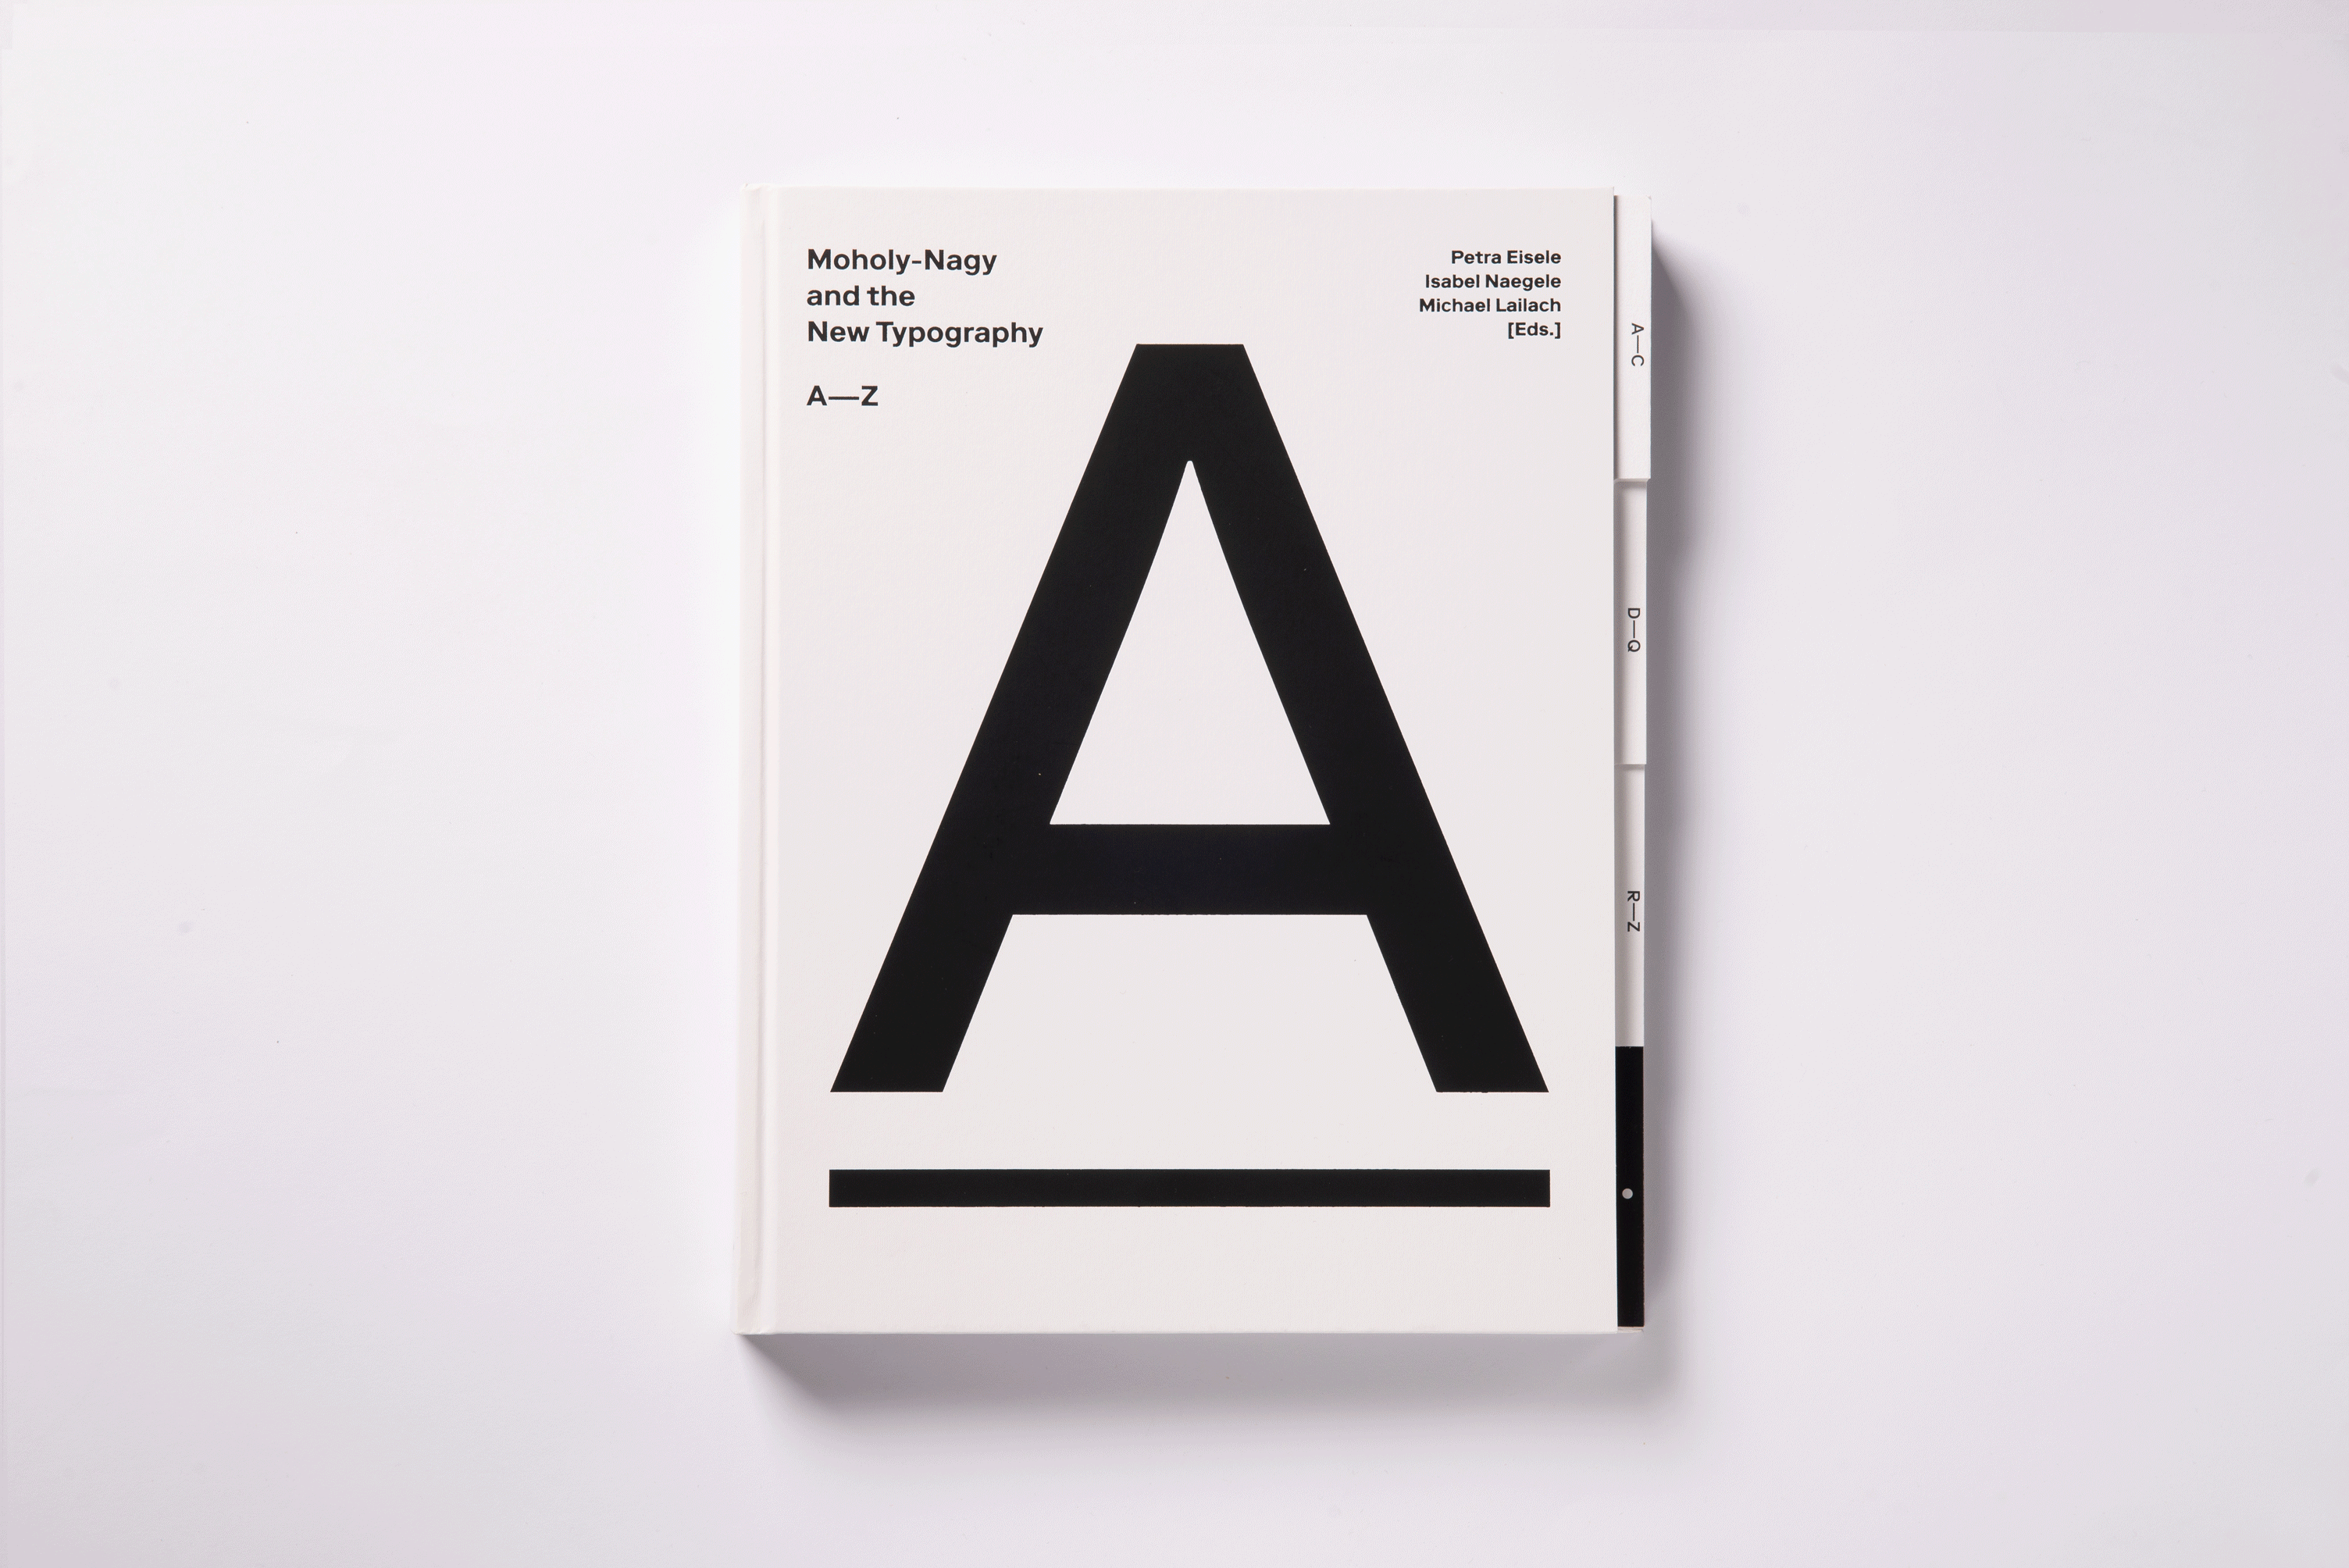 MOHOLY-NAGY AND THE NEW TYPOGRAPHY, ENGLISH EDITION